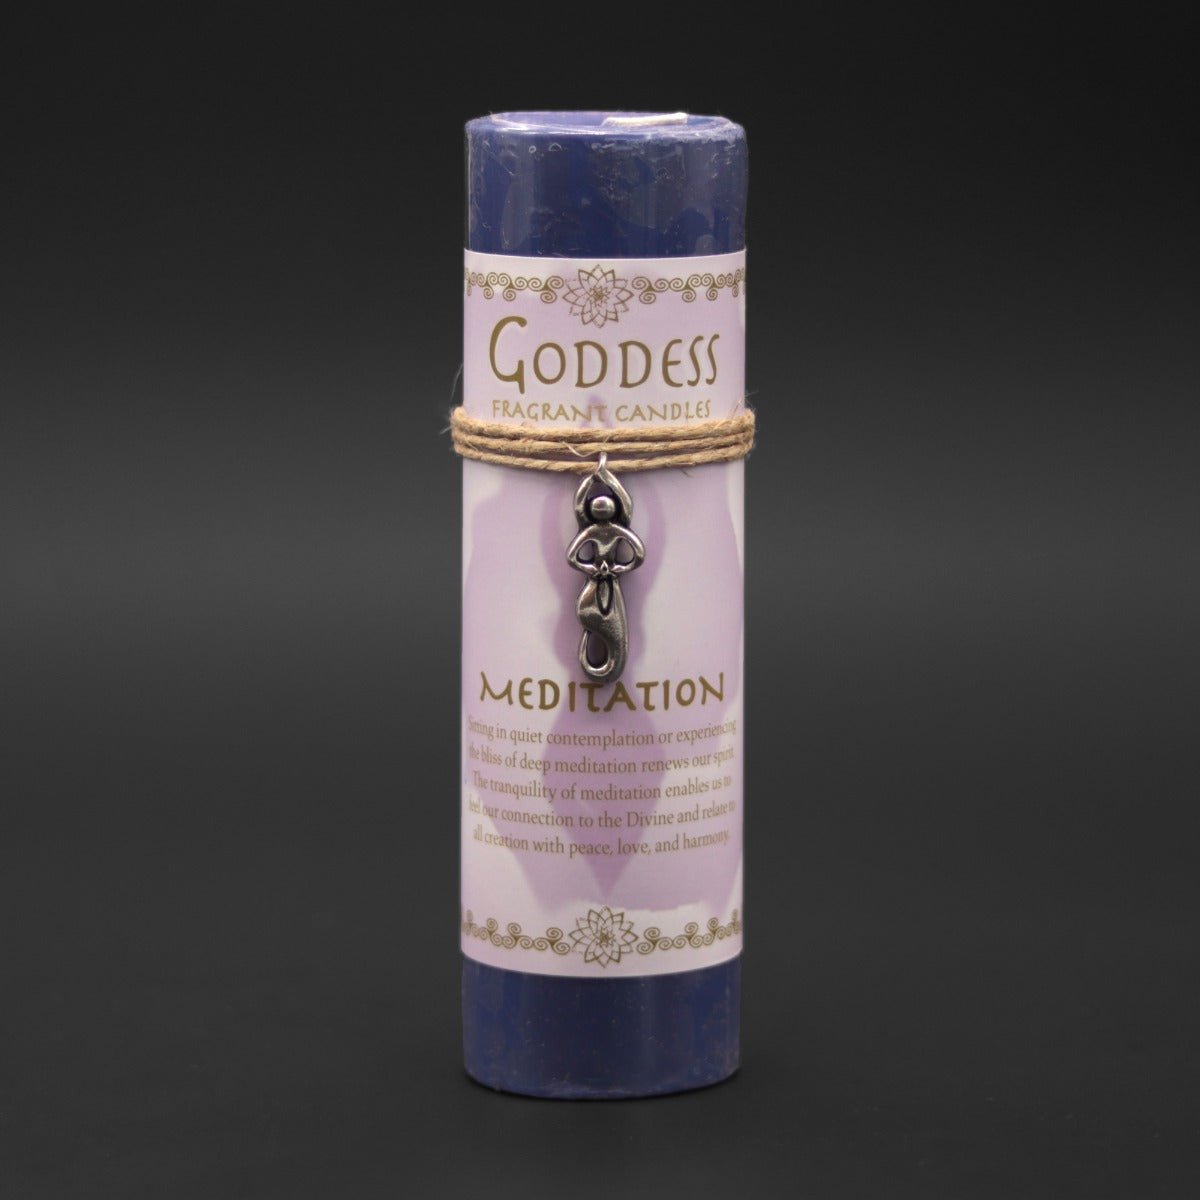 Goddess Meditation Candle with Pendant - 13 Moons